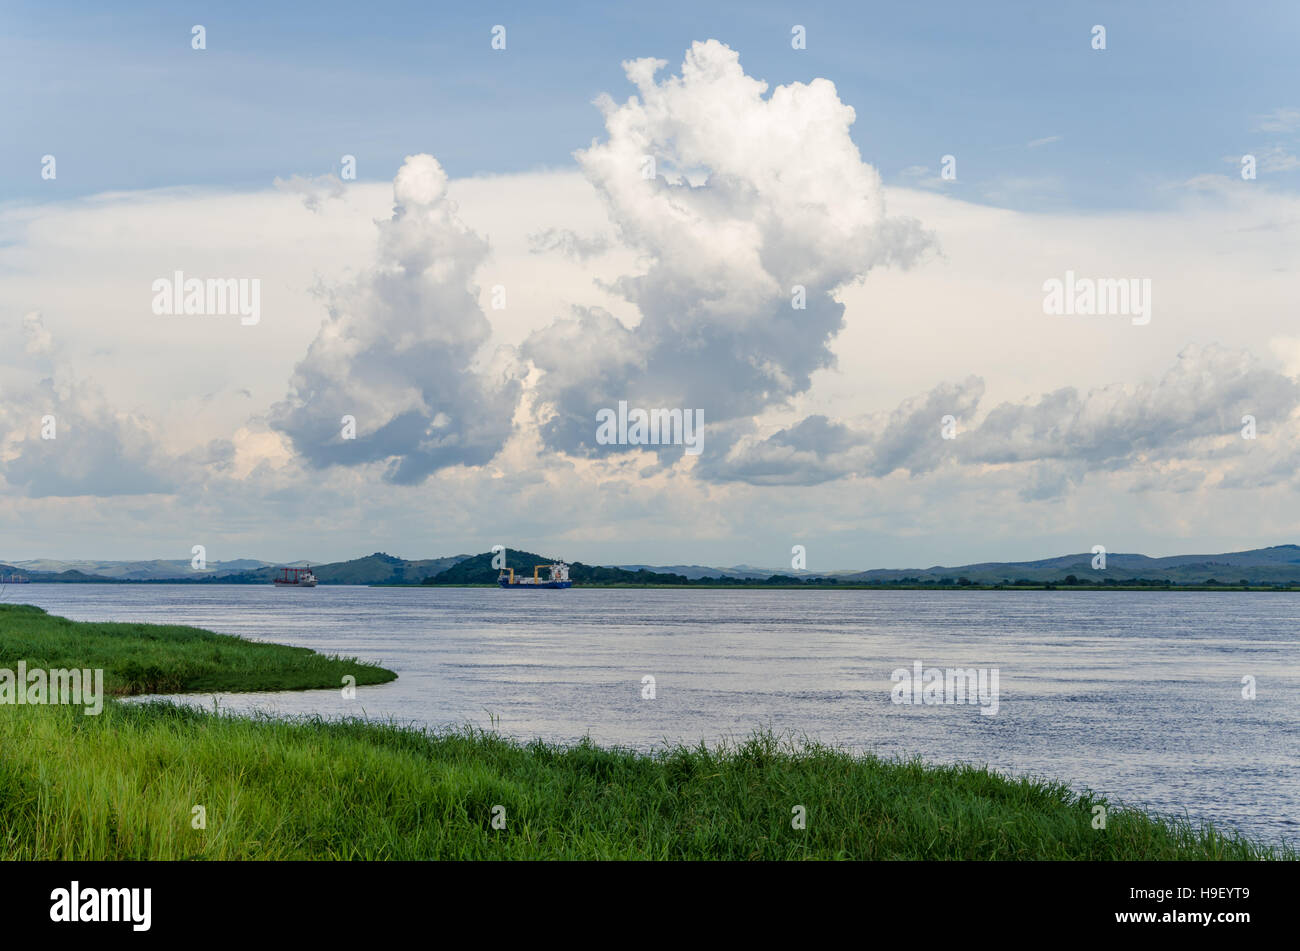 Container cargo ships on mighty Congo river with dramatic sky Stock Photo